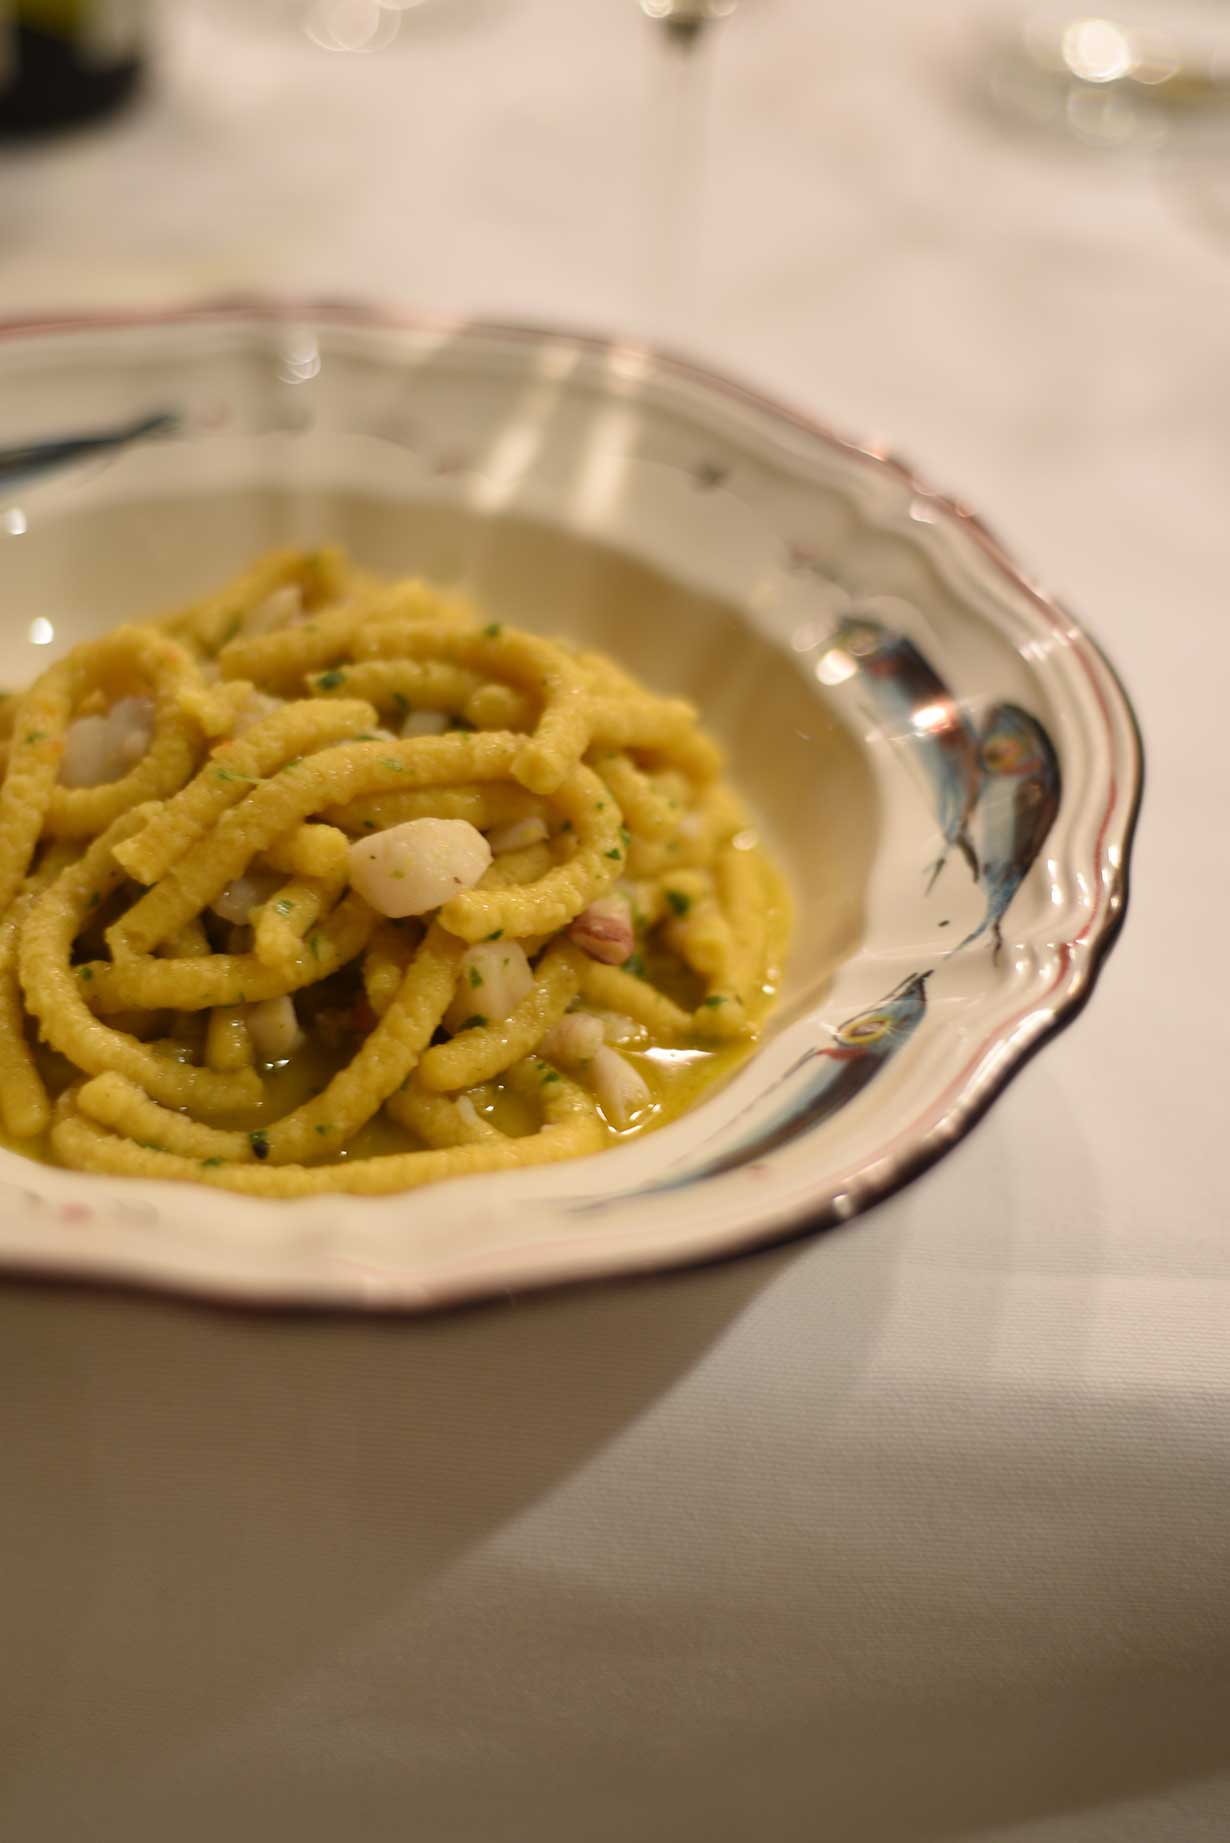 11 Things To Eat and Drink in Emilia Romagna